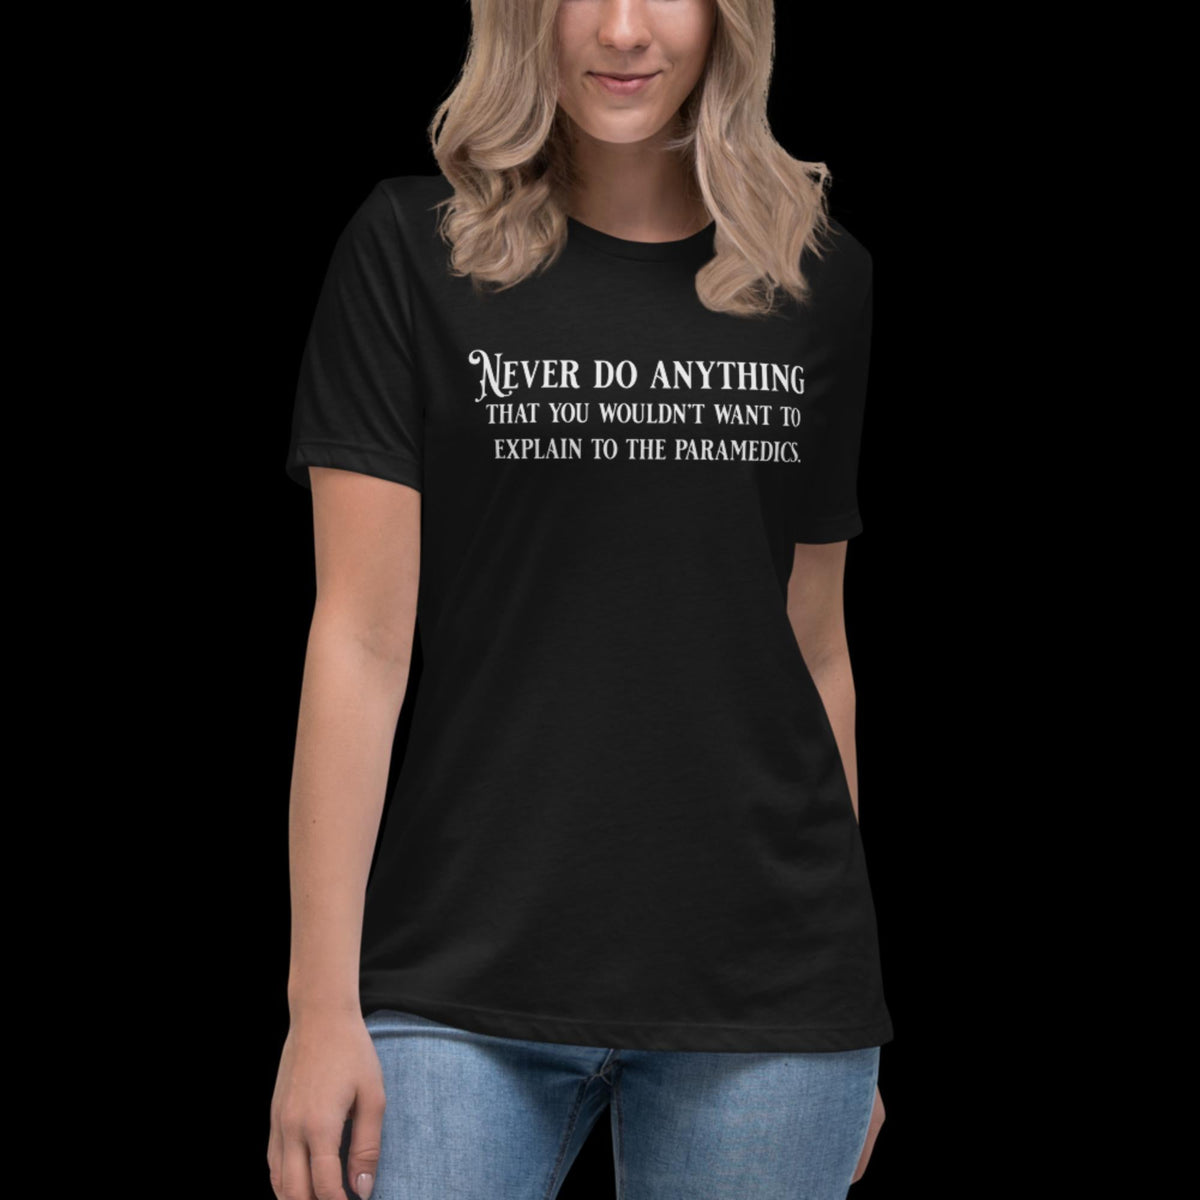 Never Do Anything You Wouldn't Want To Explain To the Paramedics Women's Relaxed T-Shirt - Salty Medic Clothing Co.